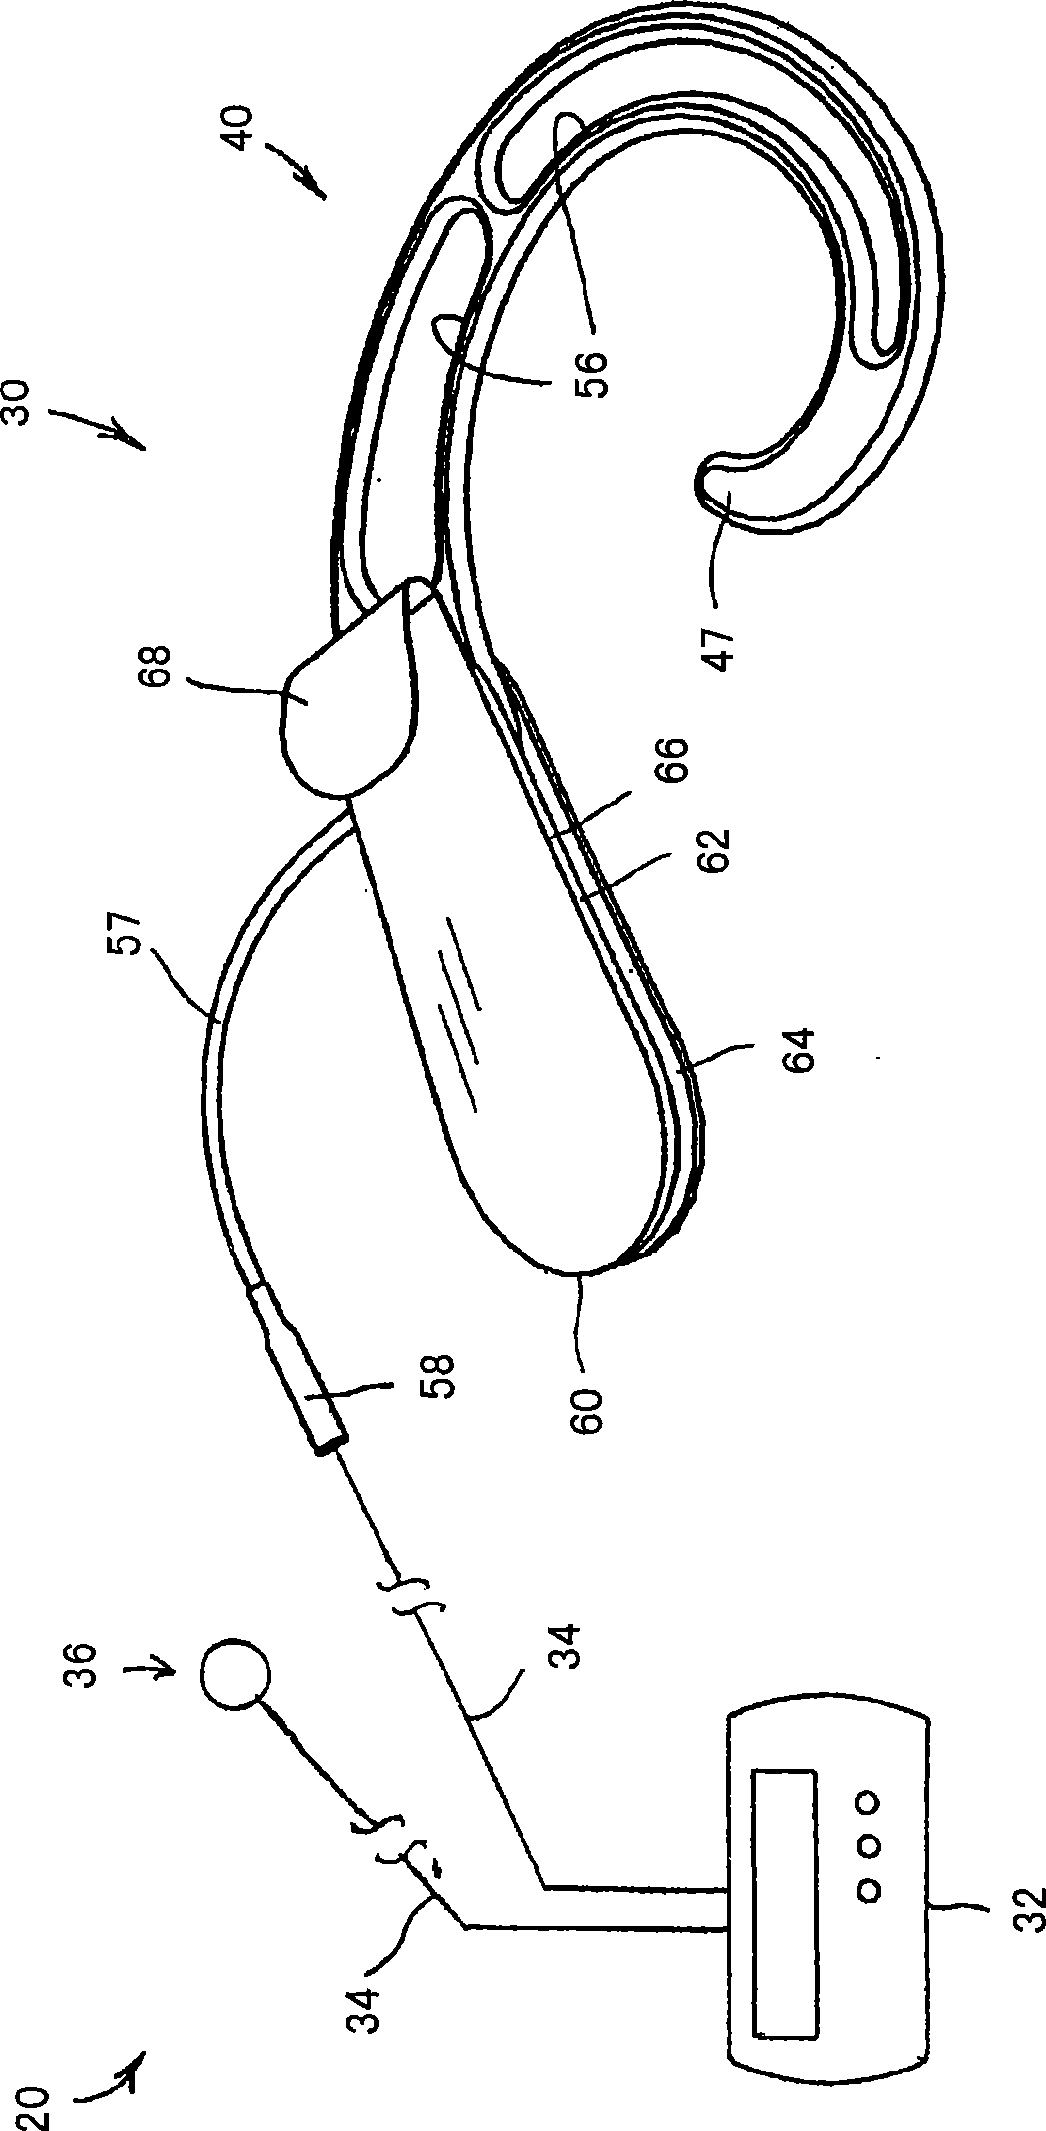 Electrode assembly and method of using same